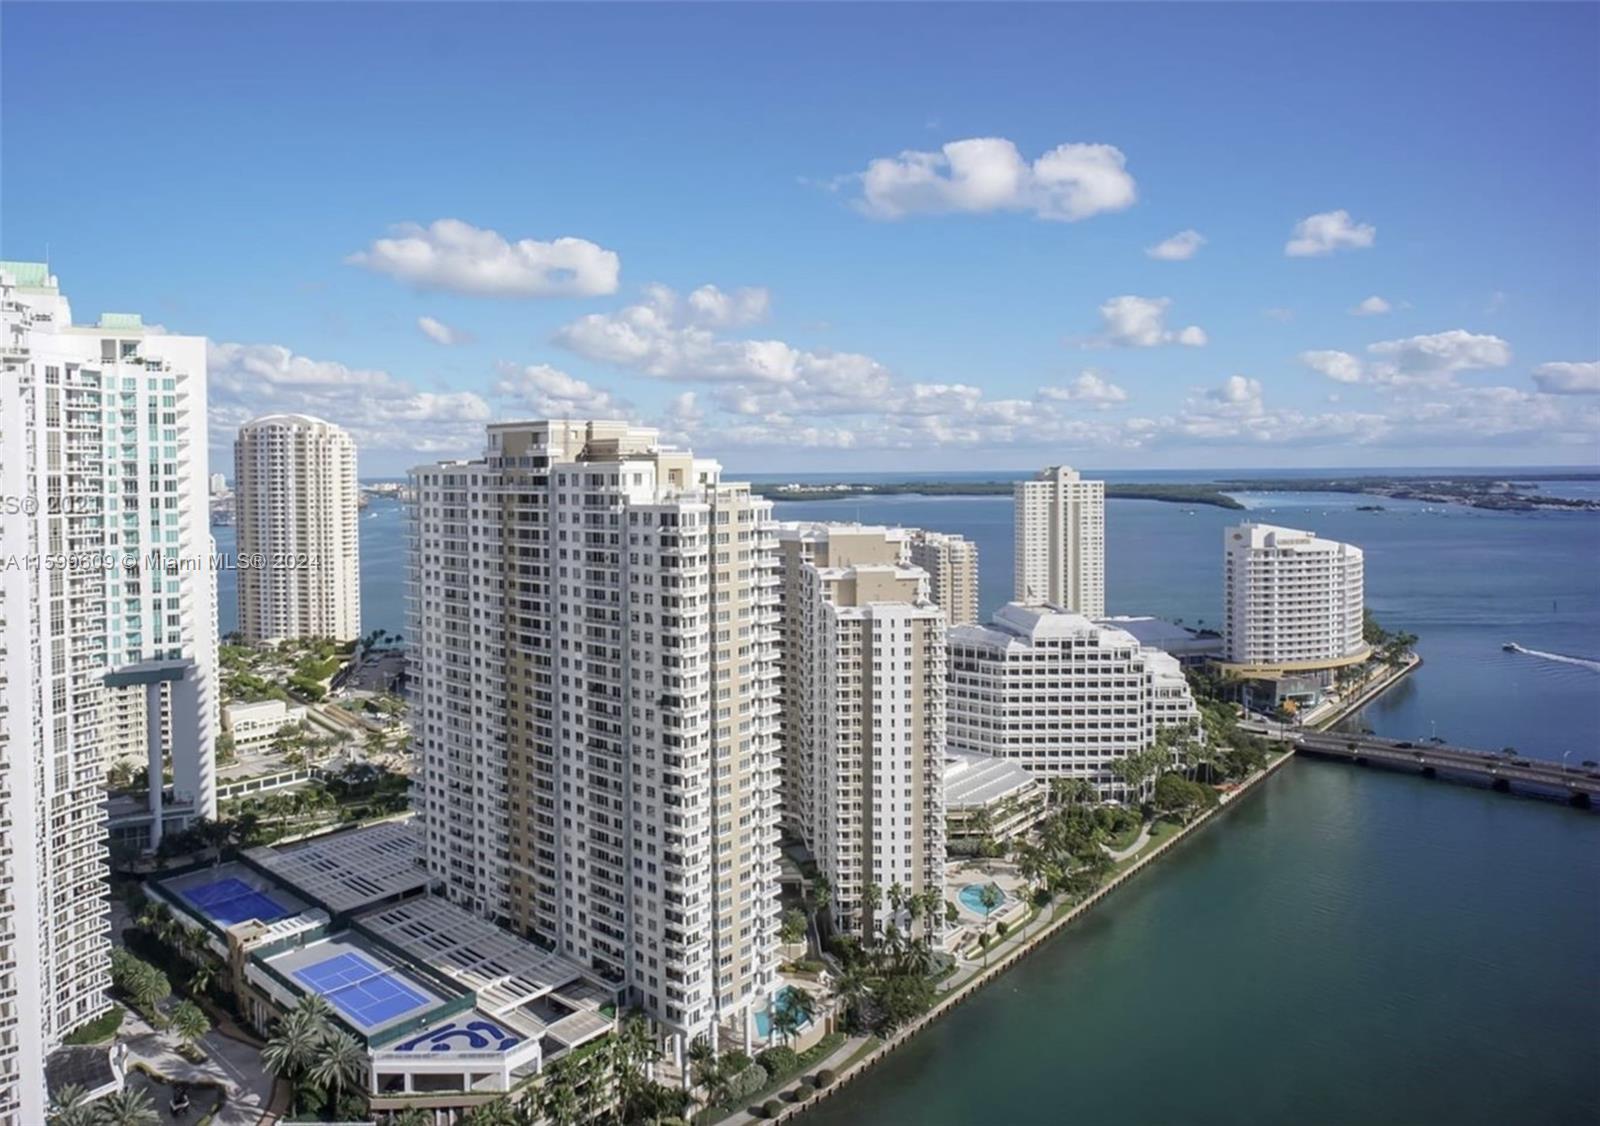 Beautiful high-floor 2-bedroom, 2-bathroom plus Den unfurnished residence in the highly desirable 07 line at The Icon Brickell. This stunning unit features breathtaking Intracoastal and City views, high-end appliances, floor-to-ceiling windows, spacious closets, wood floors. Icon Brickell offers incredible amenities such as state-of-the-art fitness center, luxury spa, Olympic pool, Pilates and spinning rooms, a movie theater, 24/7 valet and much more.